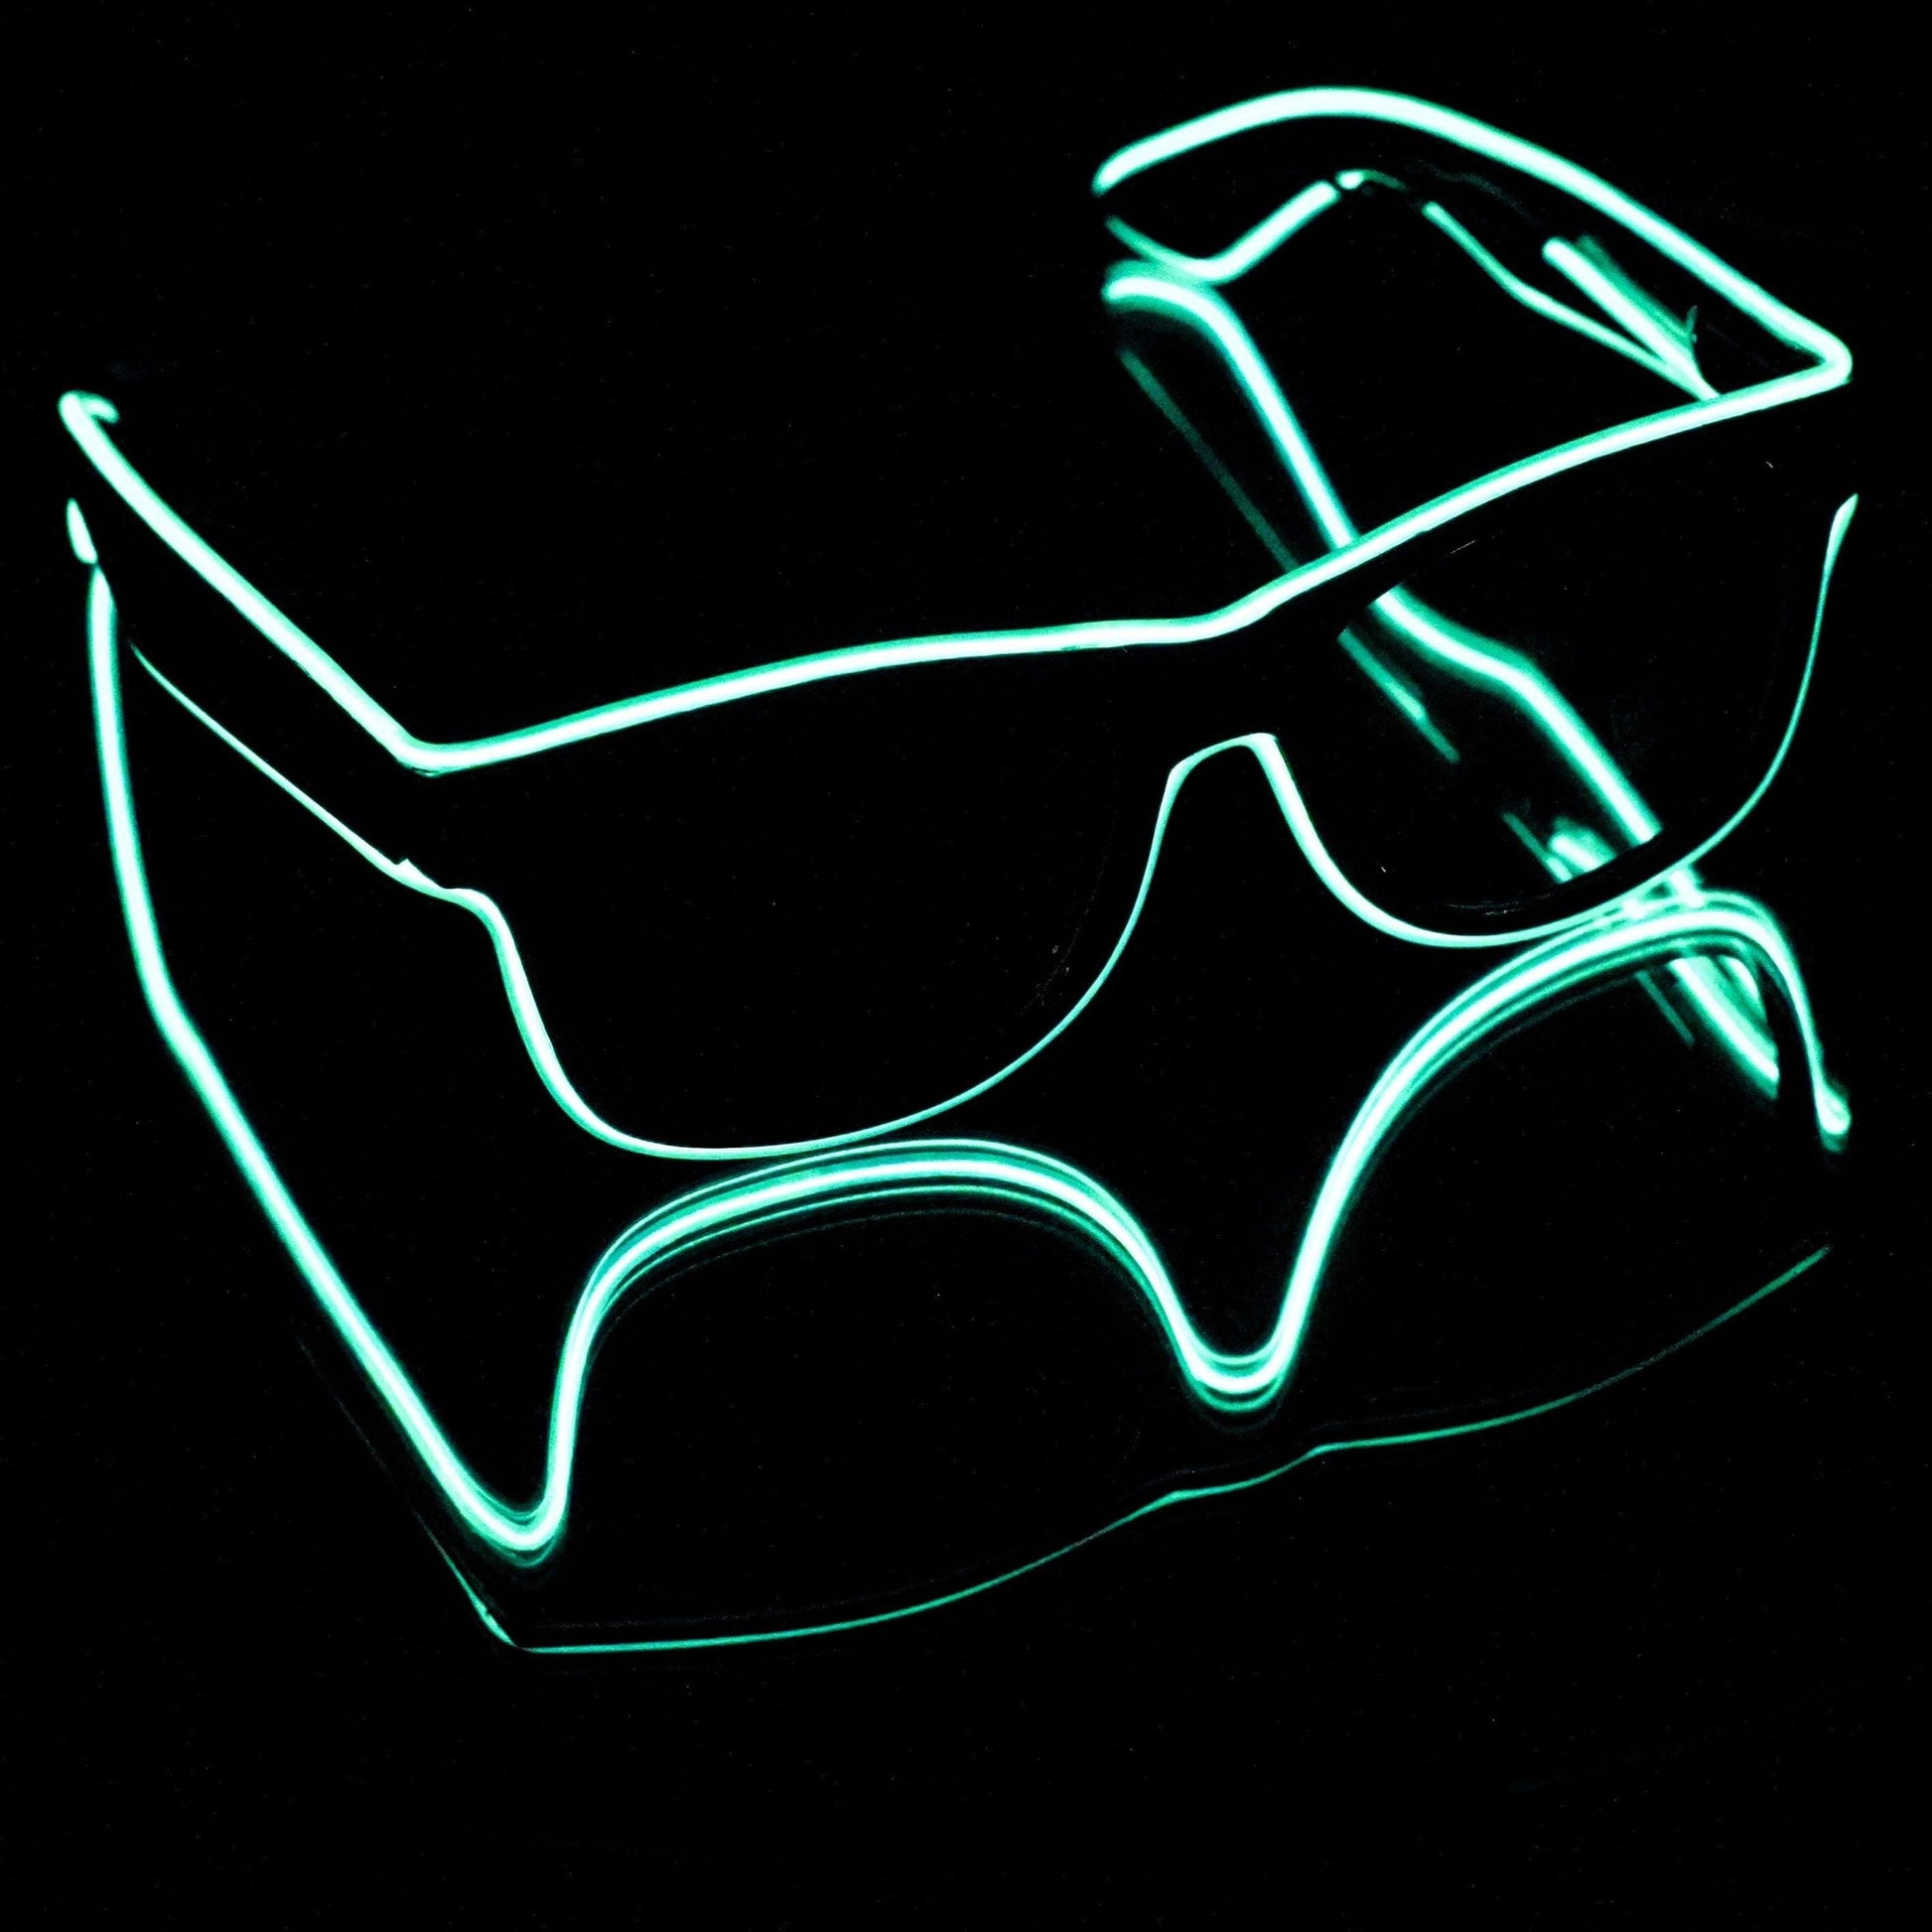 NTH Rave LED Sunglasses | Not That High